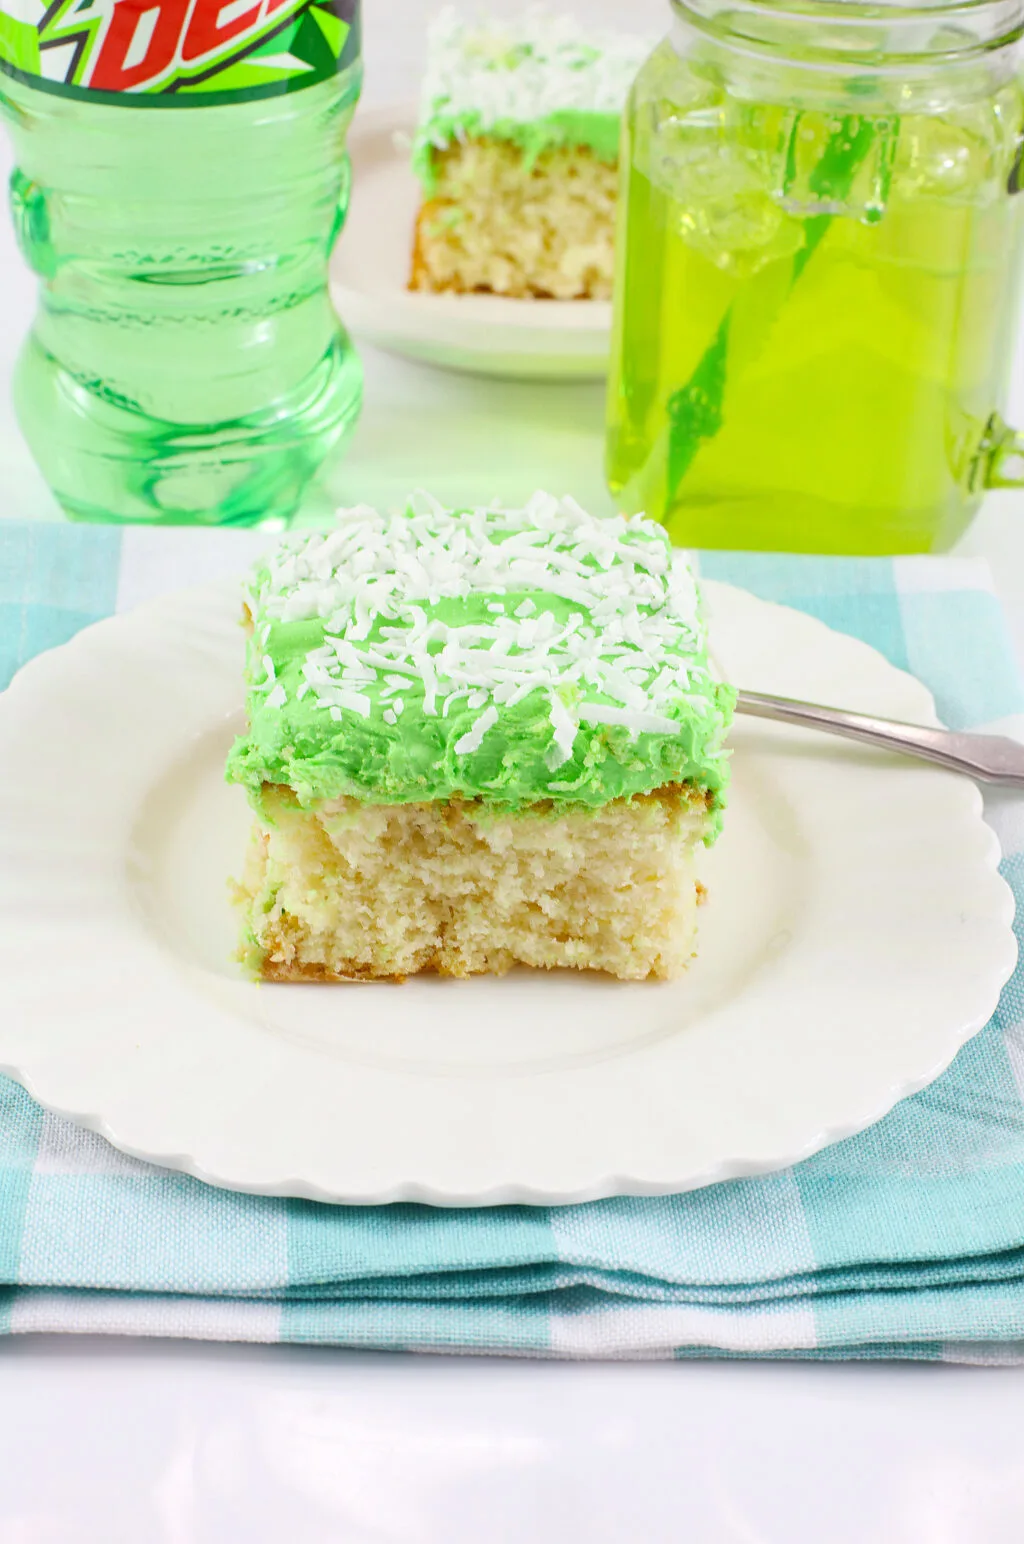 slice of mountain dew cake on white plate